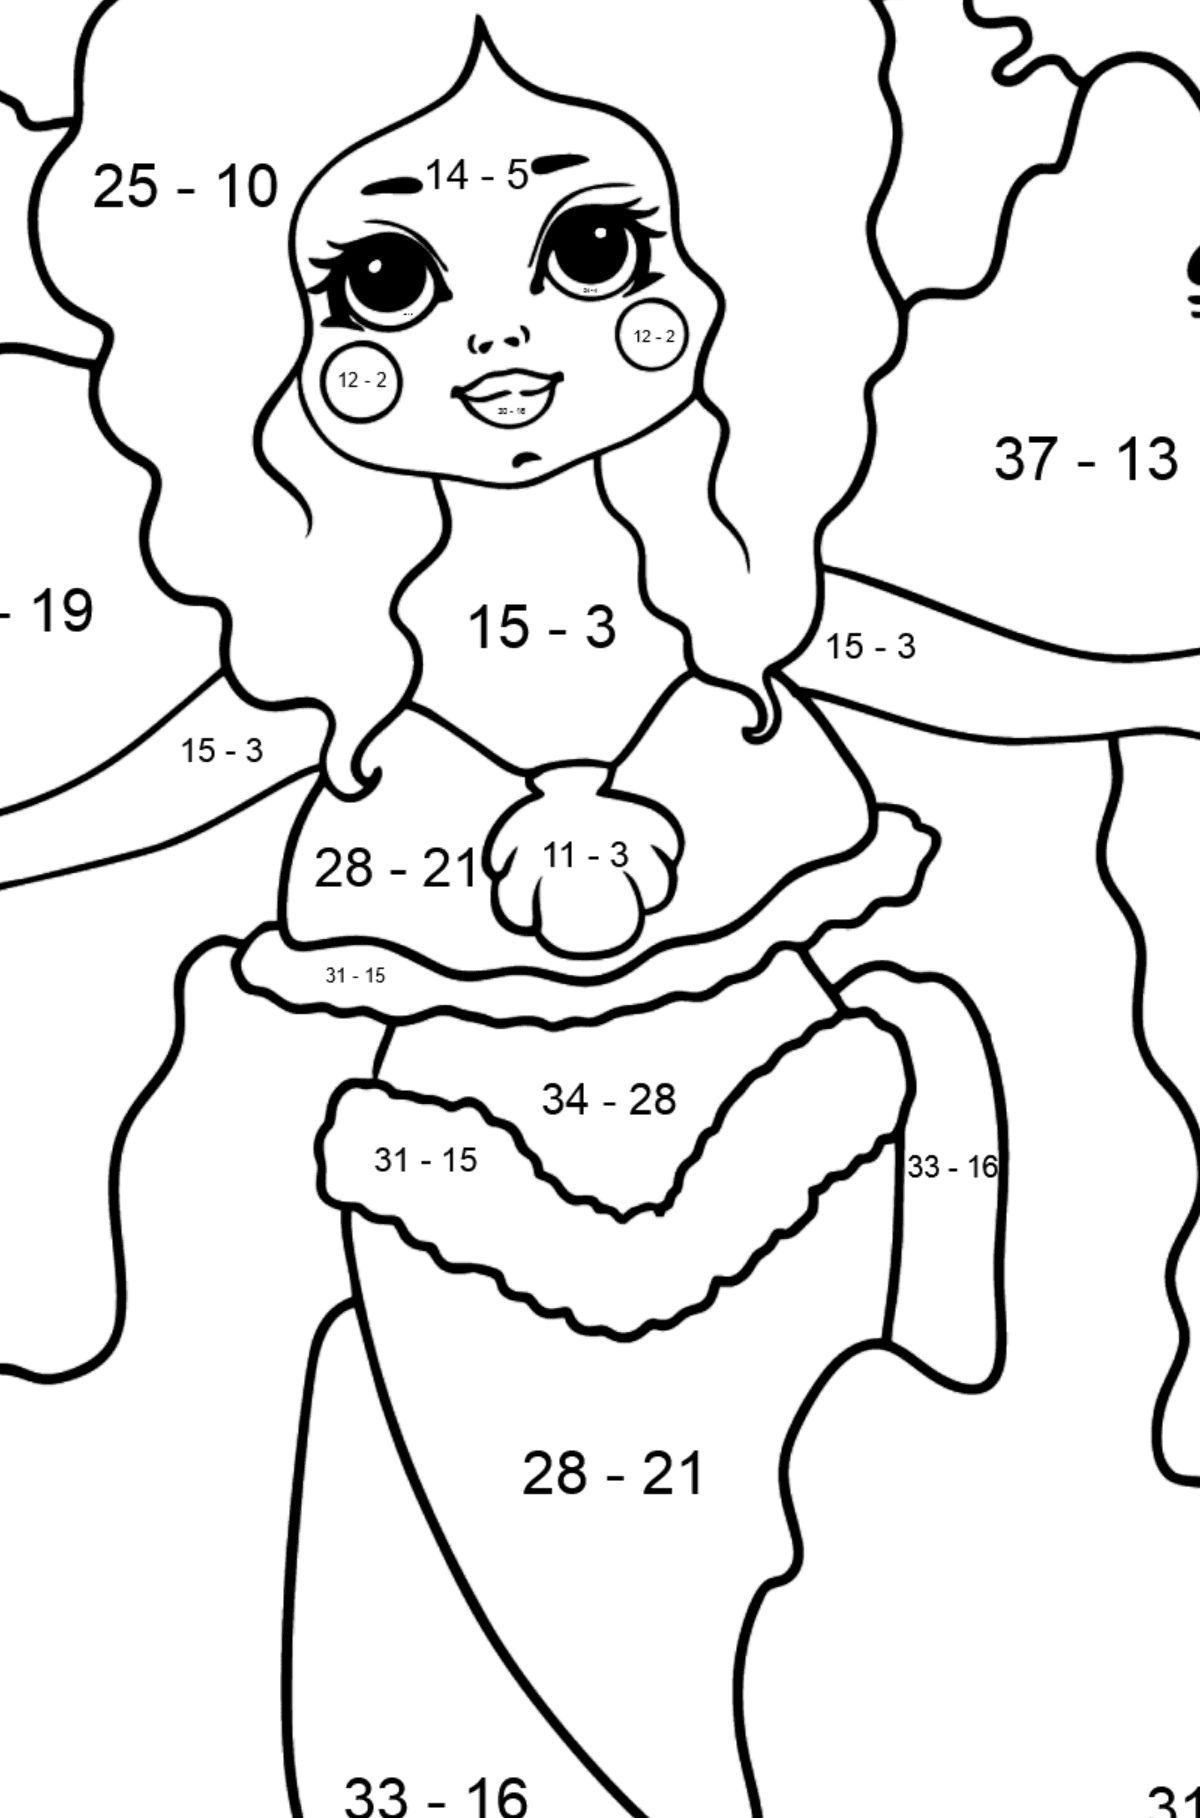 Mermaid and Colorful Corals coloring page - Math Coloring - Subtraction for Kids